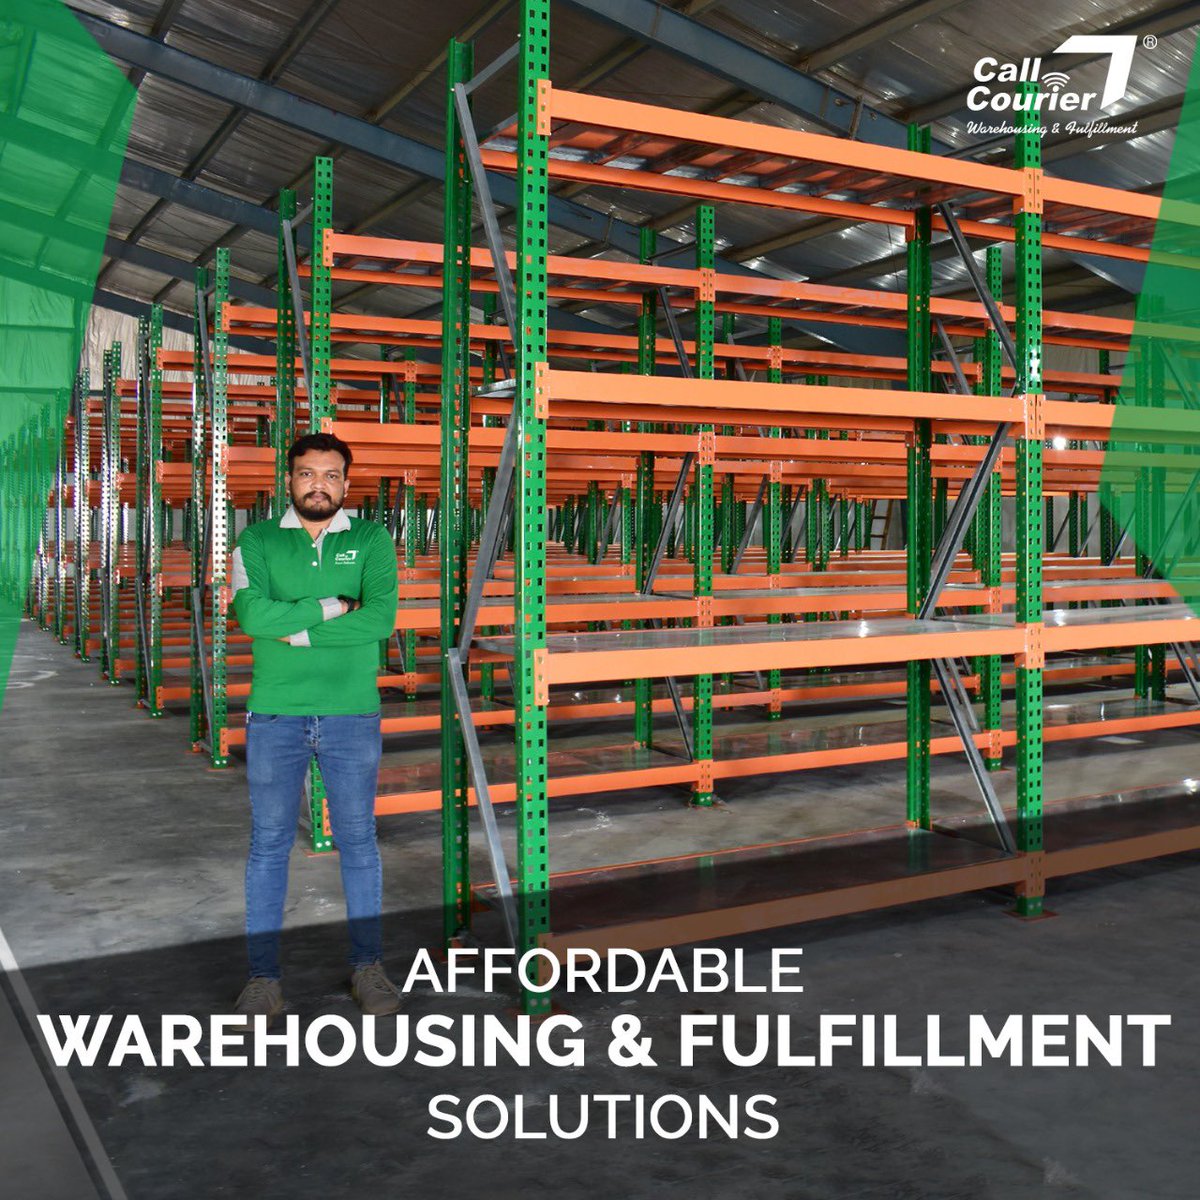 We offer affordable Warehousing & Fulfillment solutions for our customers so they can excel in their business without worrying about logistics. #CallCourier #SmartDeliveries #SmartCOD #WarehousingandFulfillment